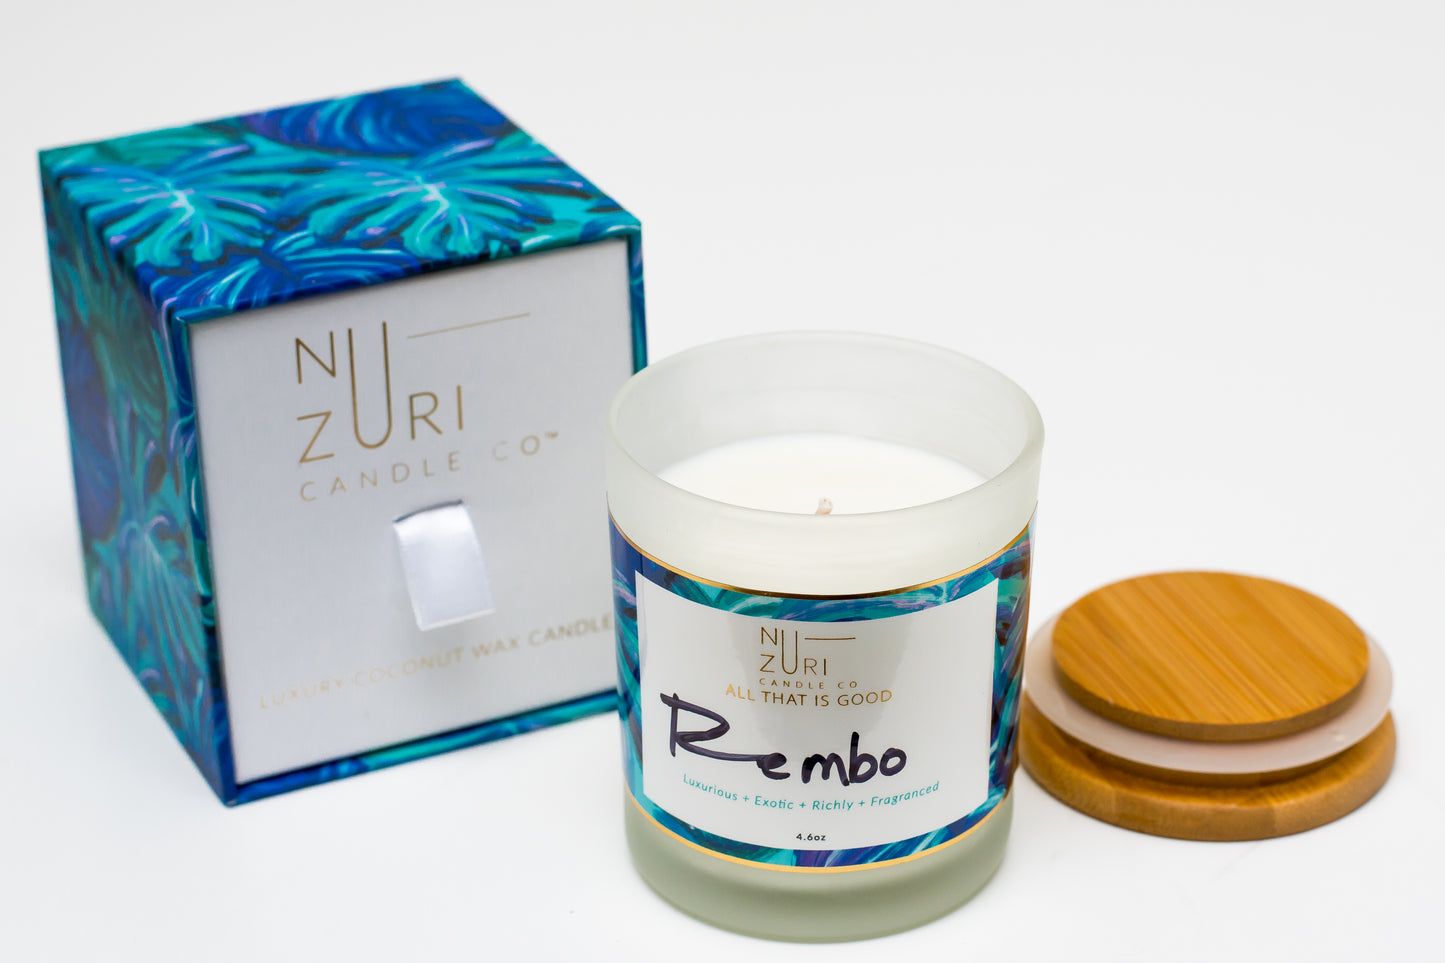 Rembo Scented Candle